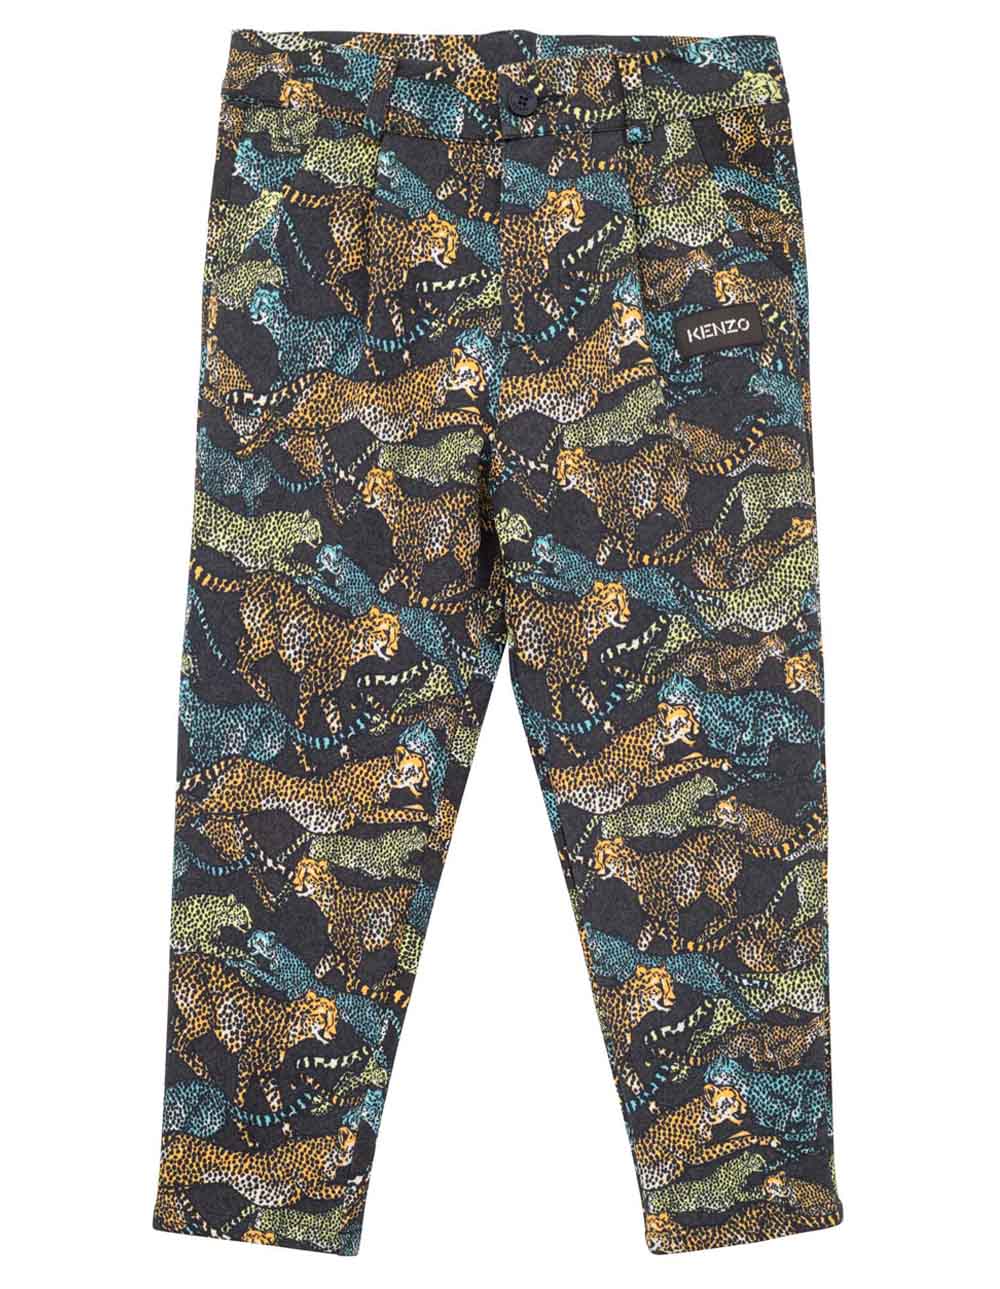 Printed-Trousers-100319510GRN-Image-1